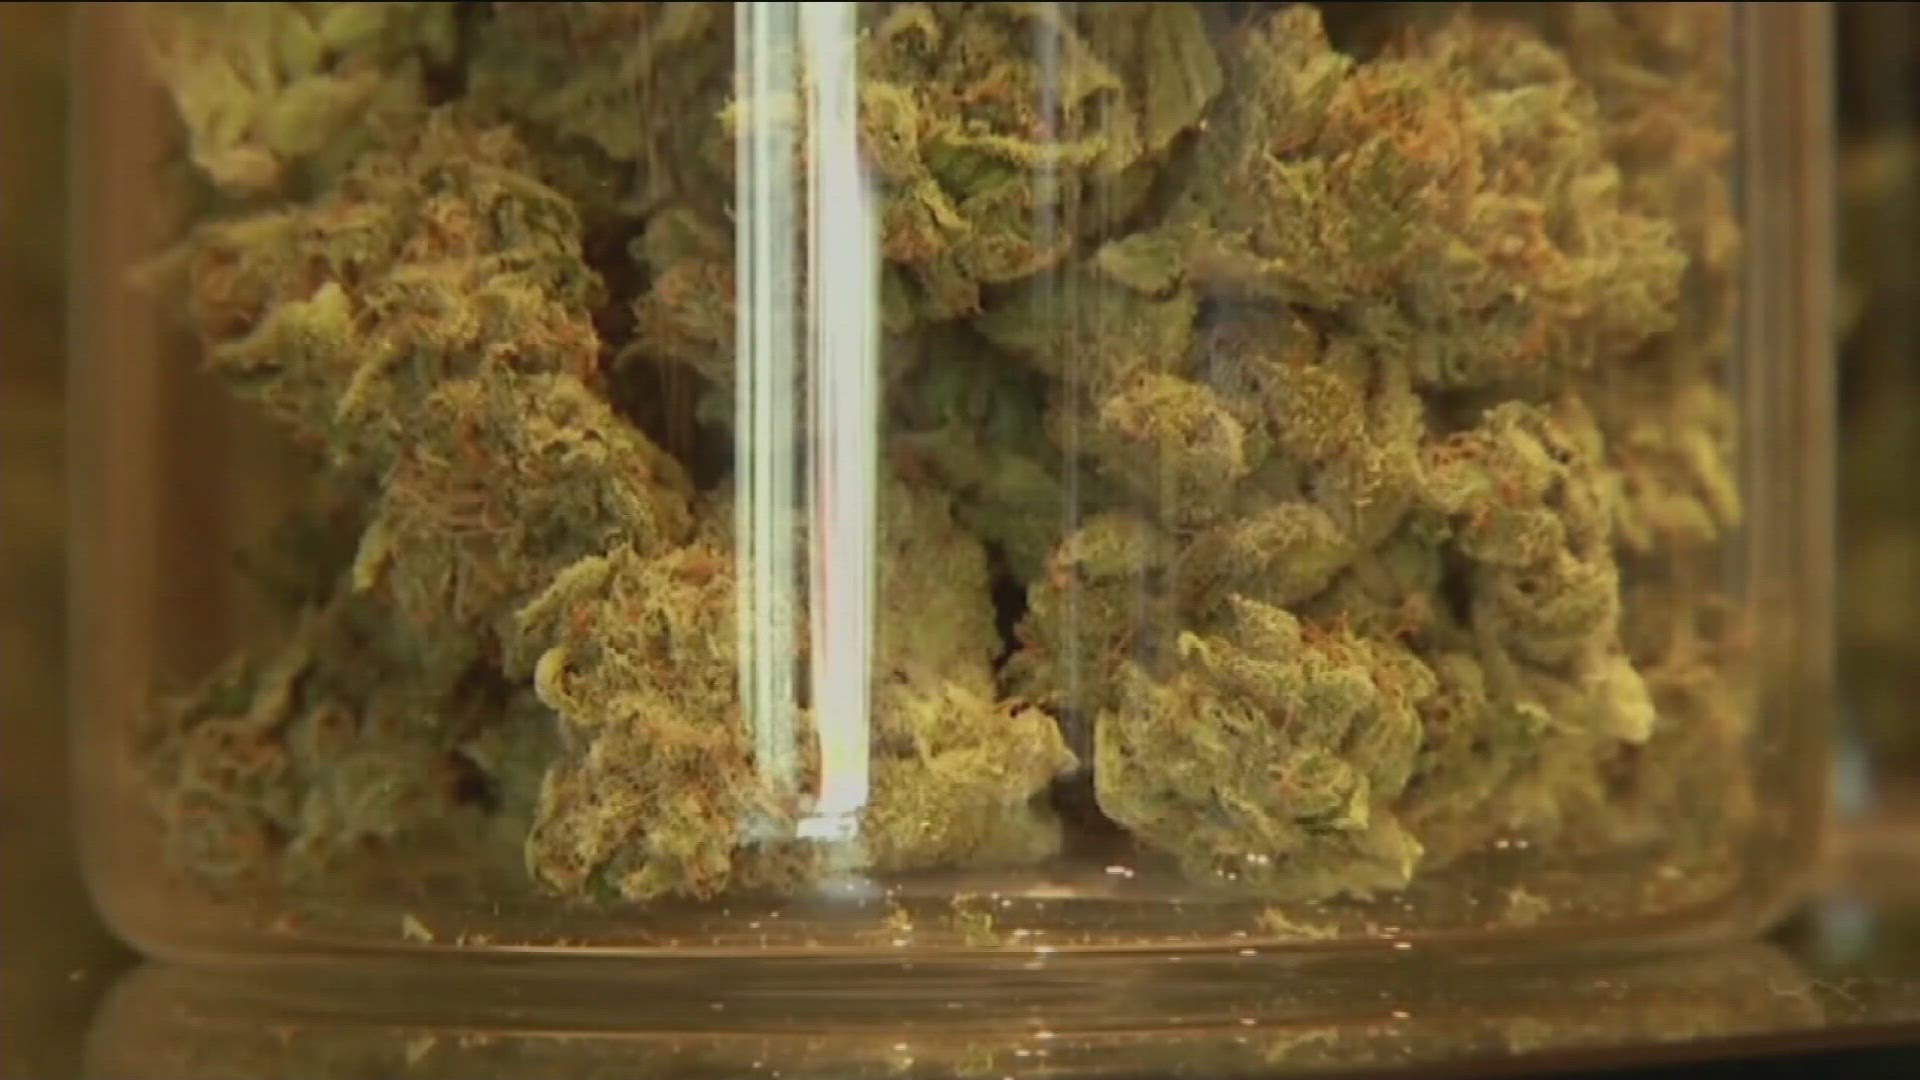 Medical marijuana dispensaries can now apply for recreational licenses, paving the way for shops to begin selling to the public.